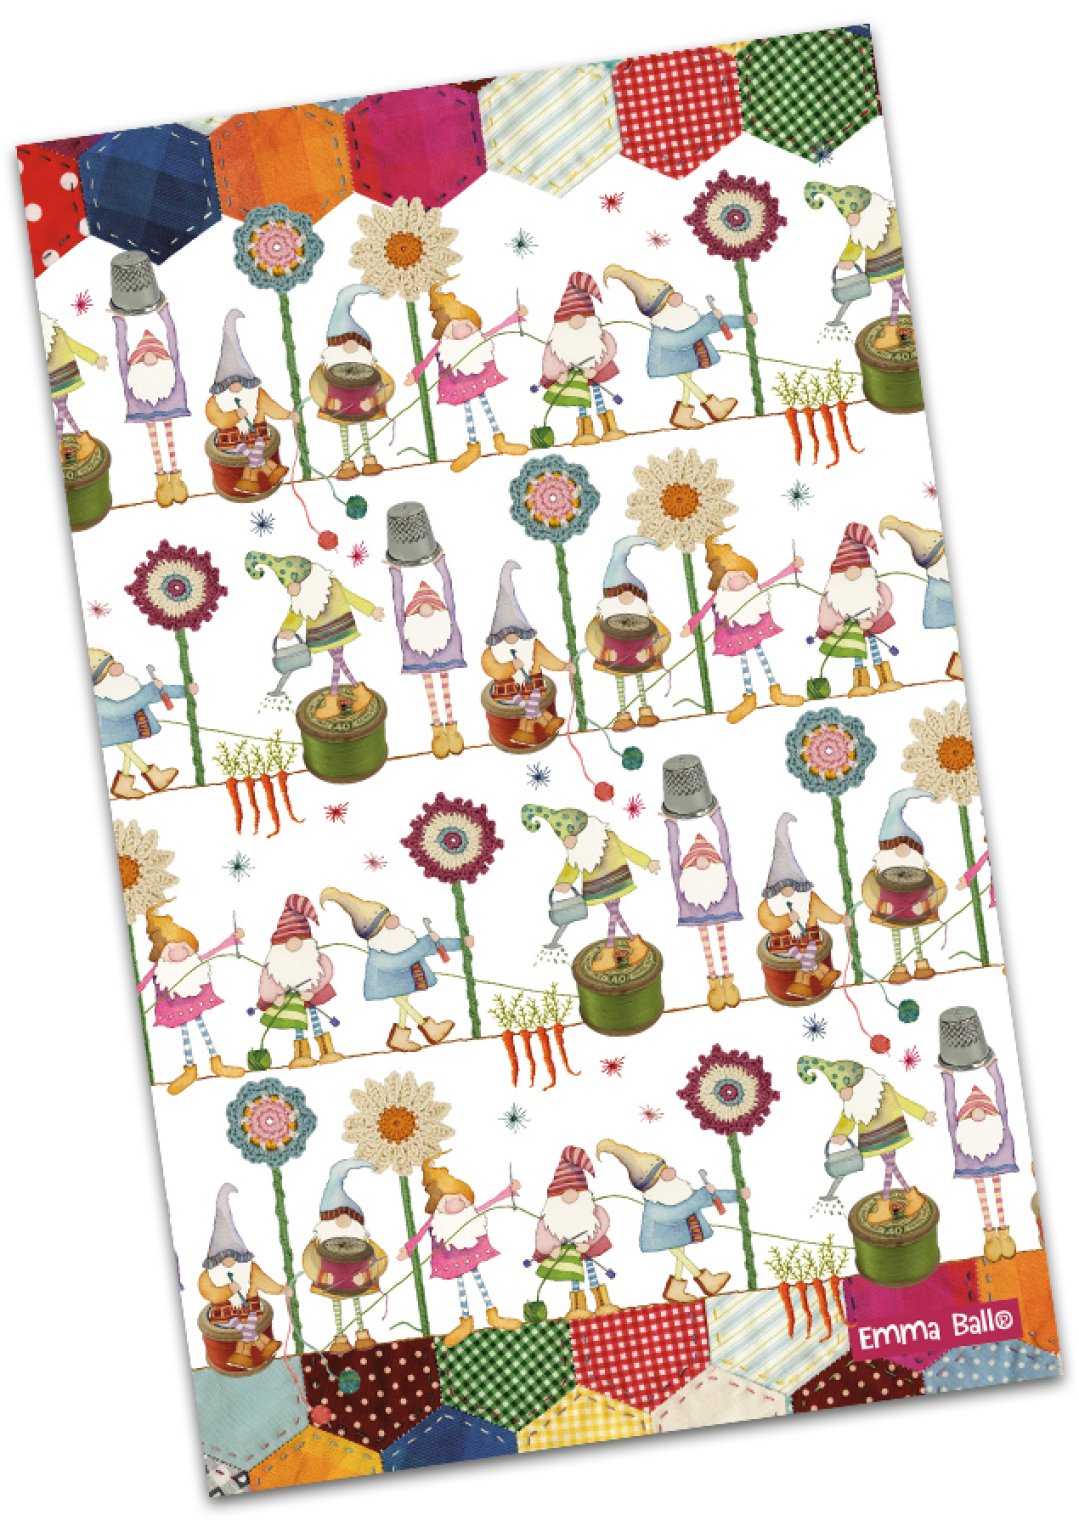 Emma Ball "Crafting Gnomes", Pure cotton tea towel. Printed in the UK.